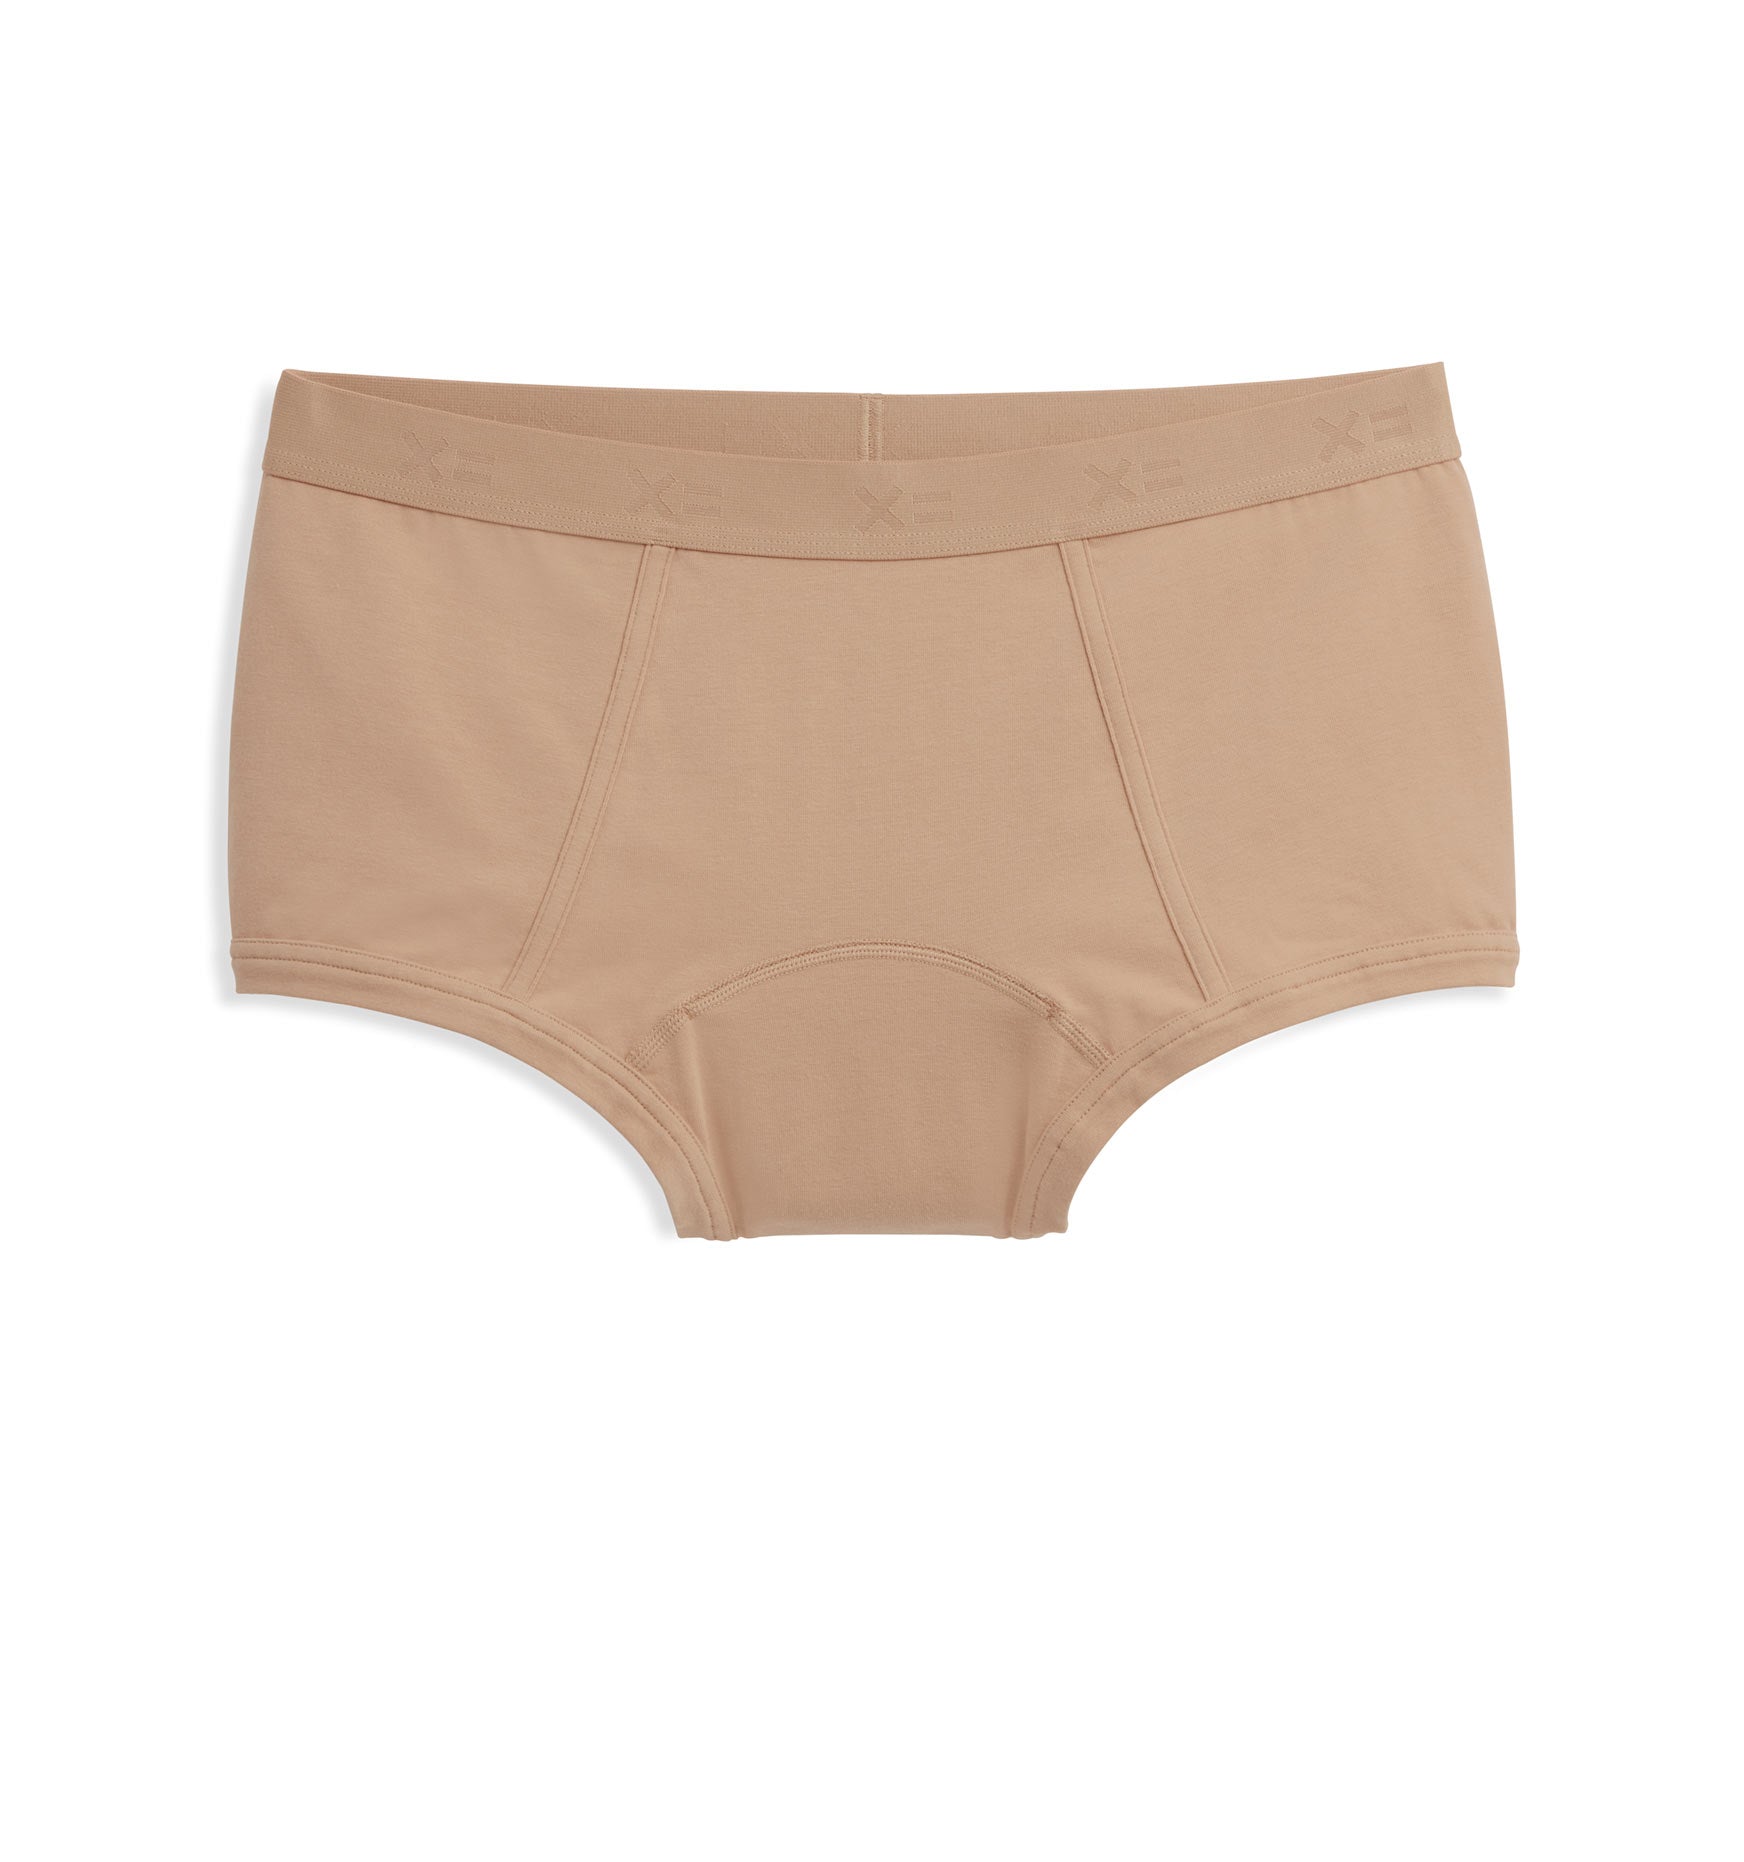 Image of First Line Period Boy Shorts - Chai